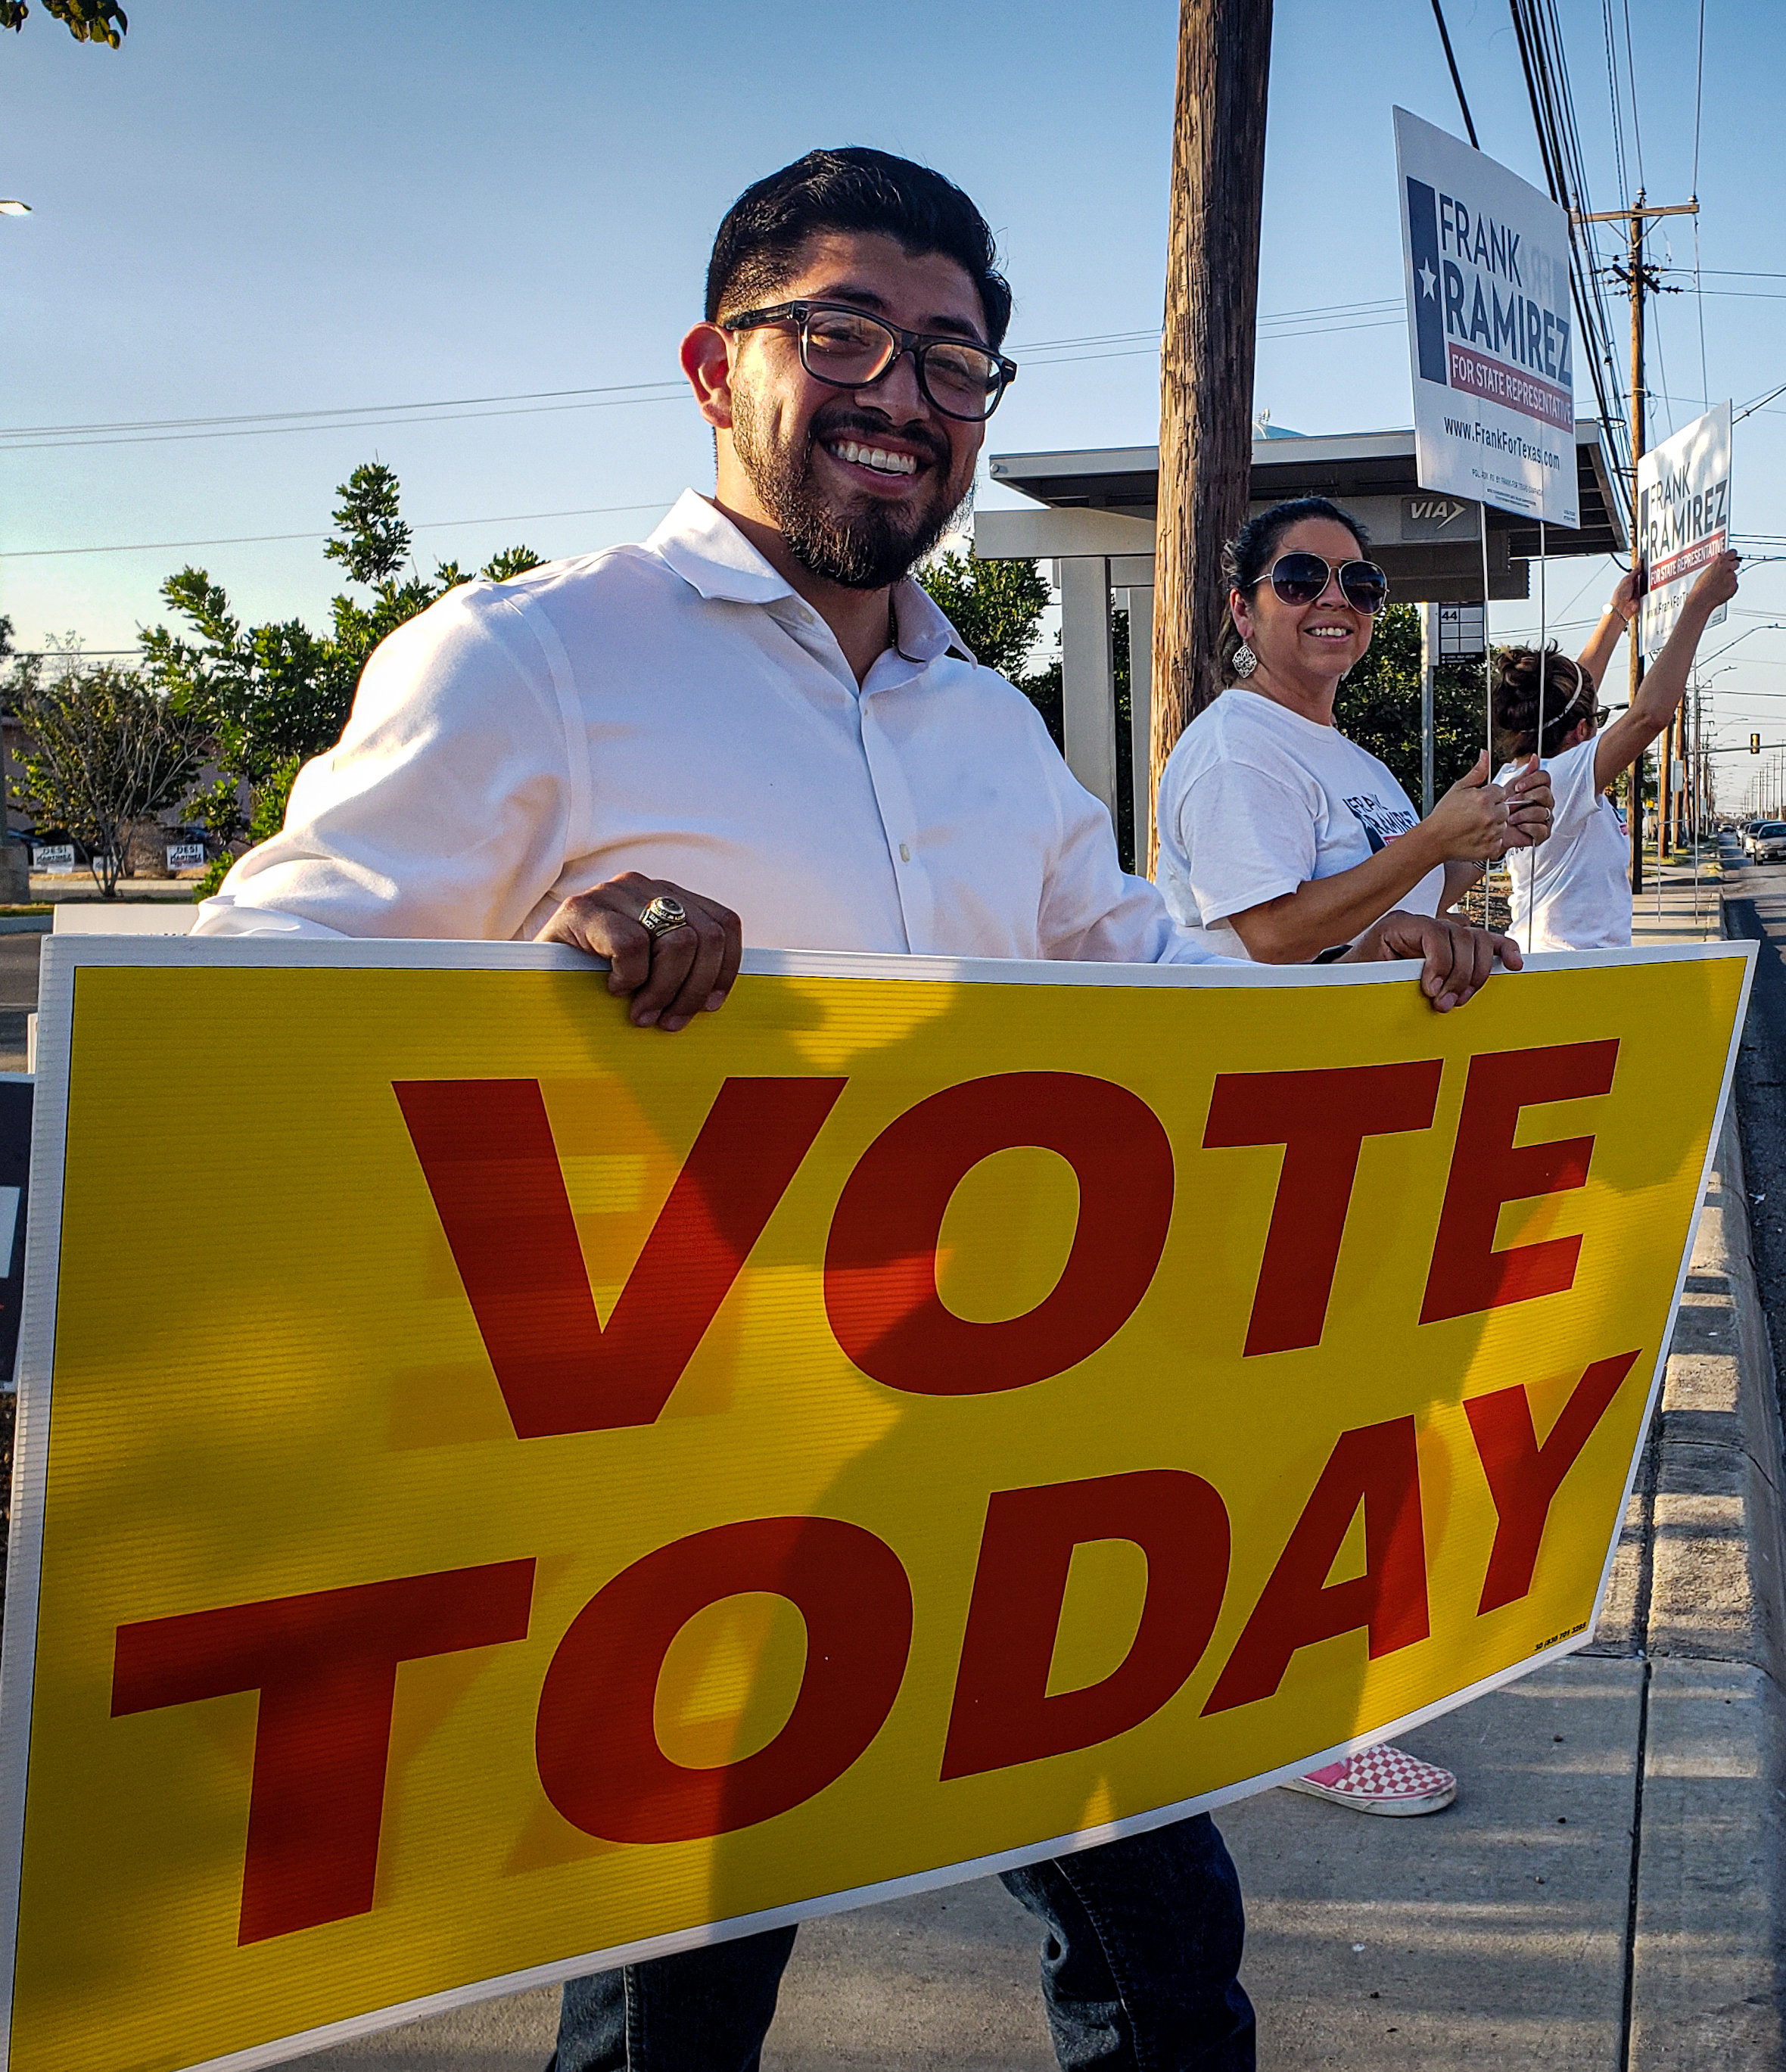 Frank Ramirez in a white shirt standing on the side of a busy street holding a yellow sign with red lettering that reads 'Vote Today'. A supporter in sunglasses stands a few feet to his left sporting a large smile and giving a thumbs up.